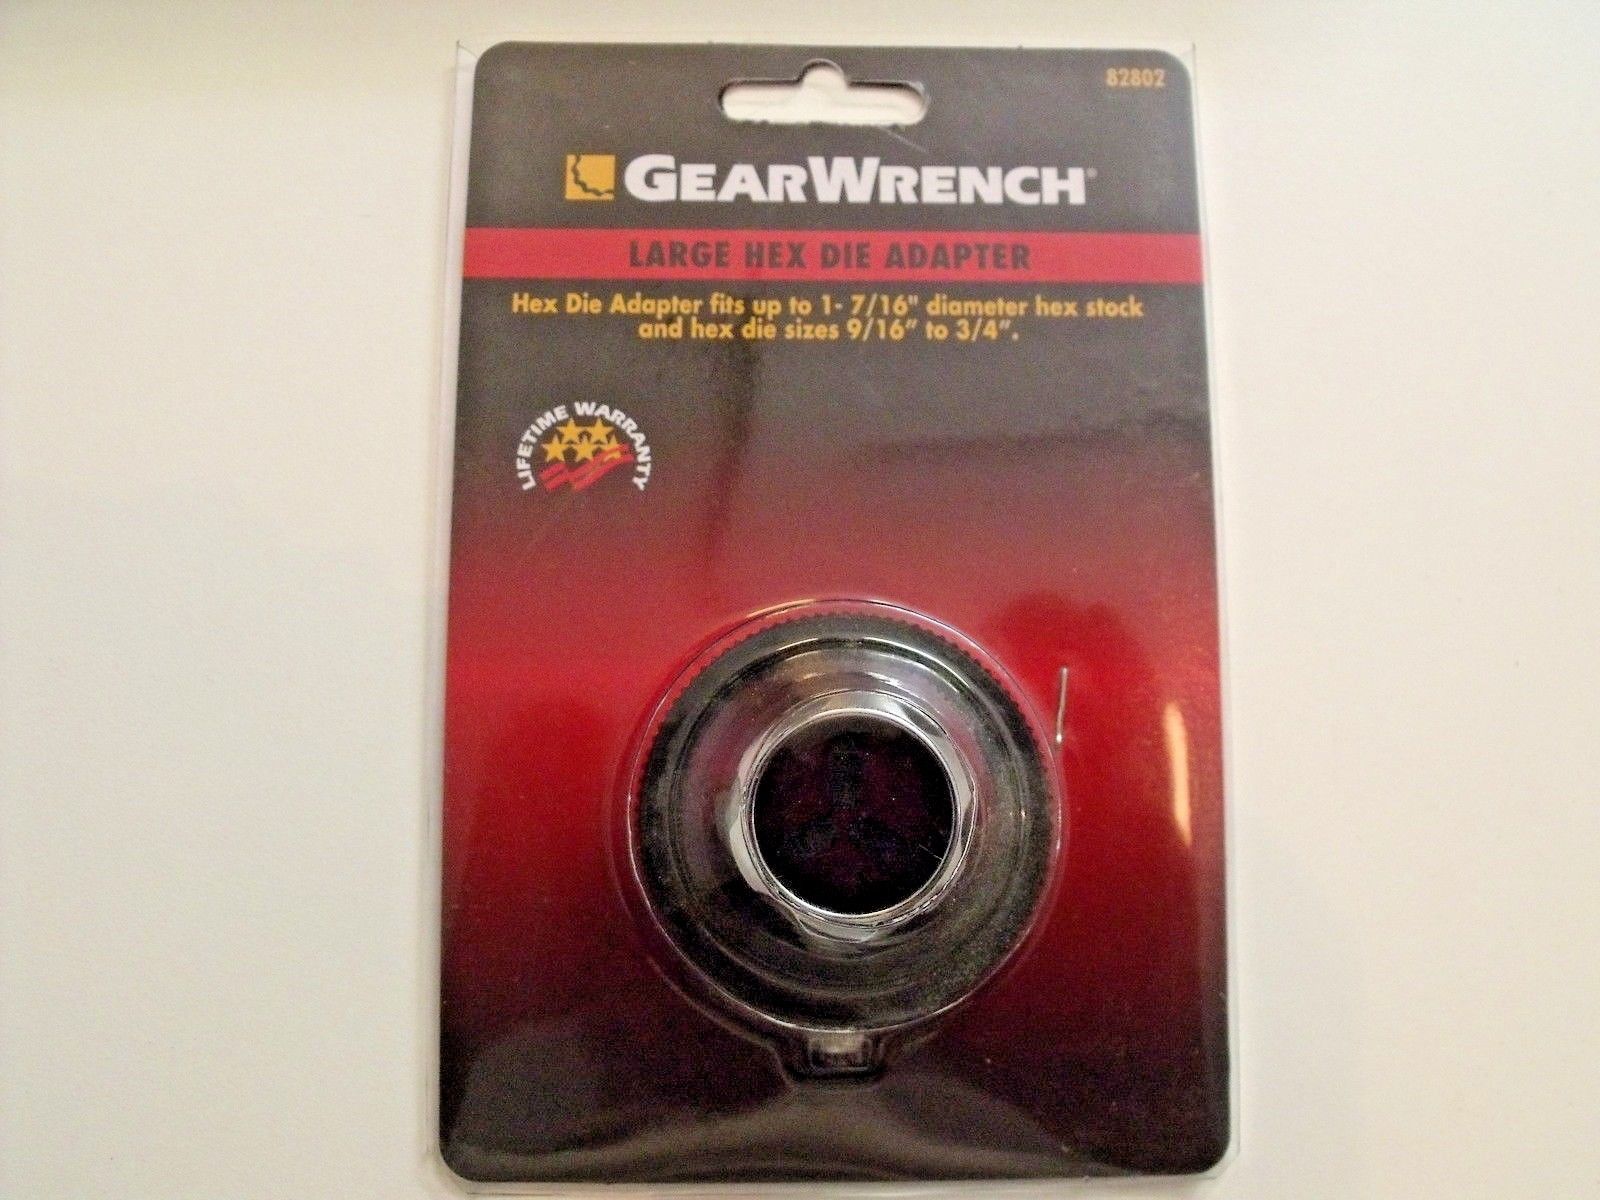 GearWrench 82802 Large Hex Die Adapter